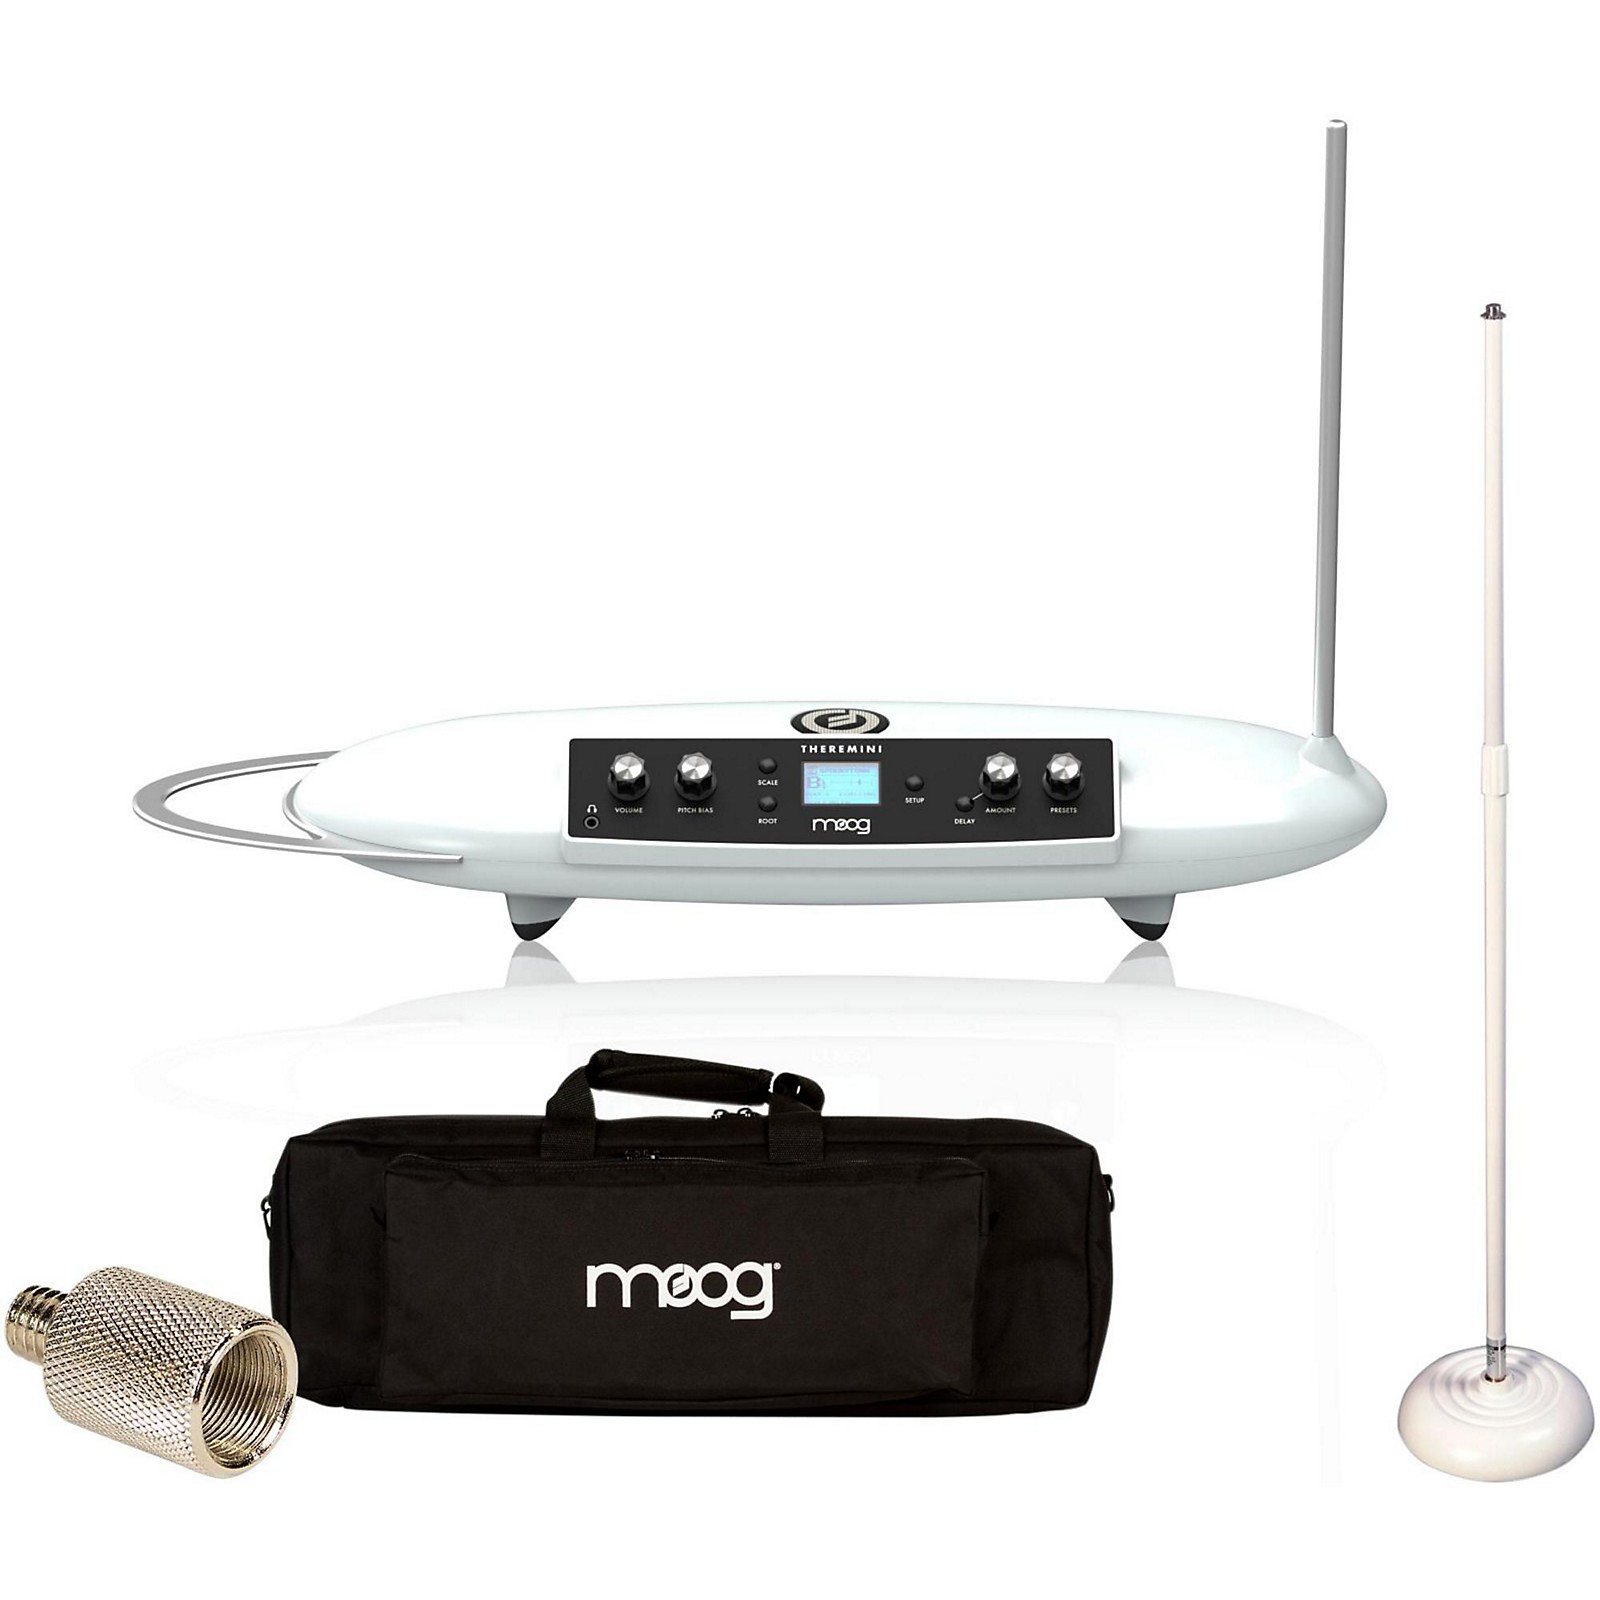 Moog Theremini Theremin with Assistive Pitch Correction